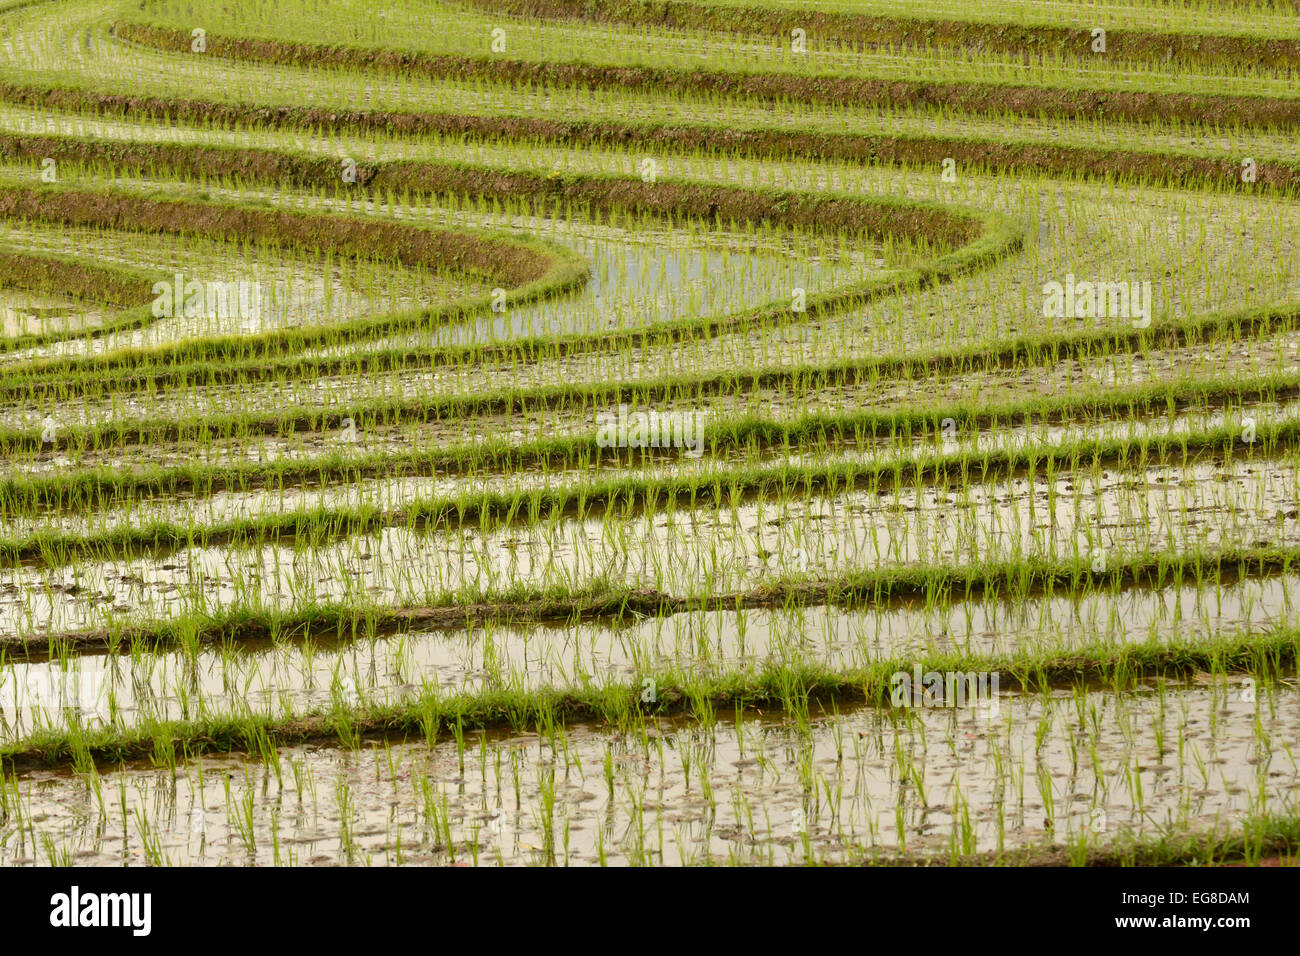 Asian Rice  (Oryza sativa) growing in terraced field, Bali, Indonesia, October Stock Photo